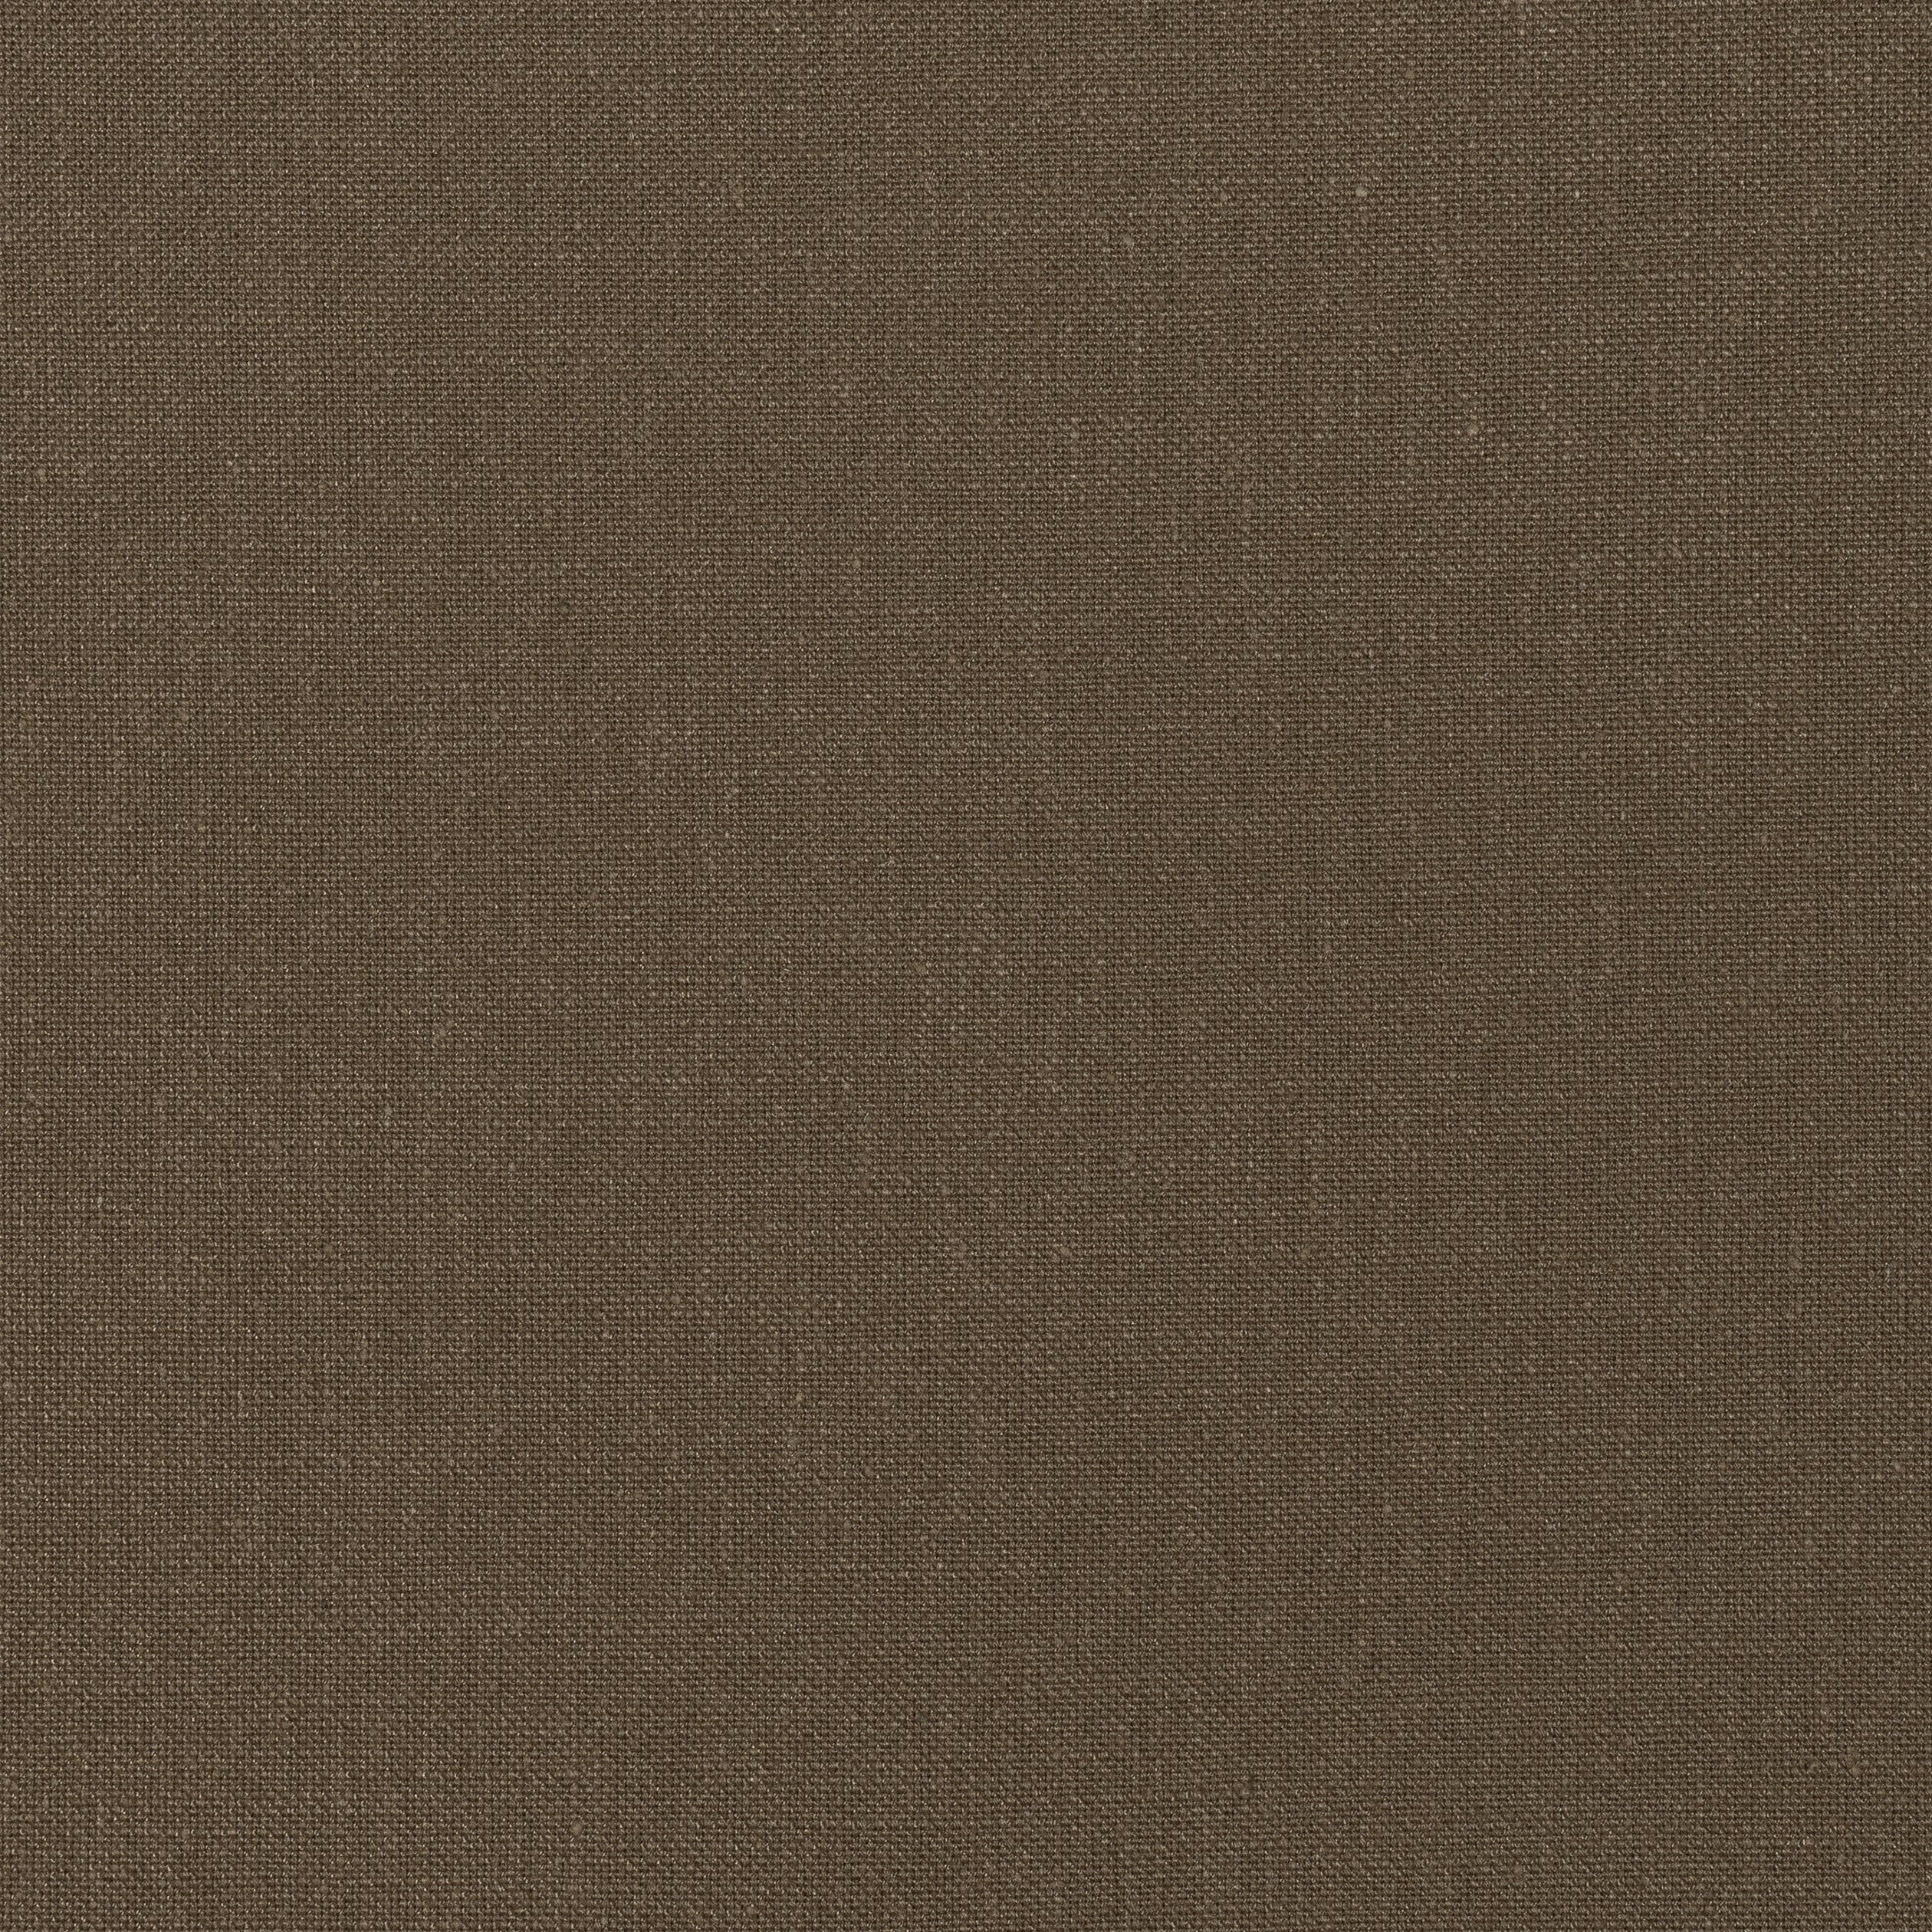 Palisade Linen fabric in chocolate color - pattern number FWW7661 - by Thibaut in the Palisades collection